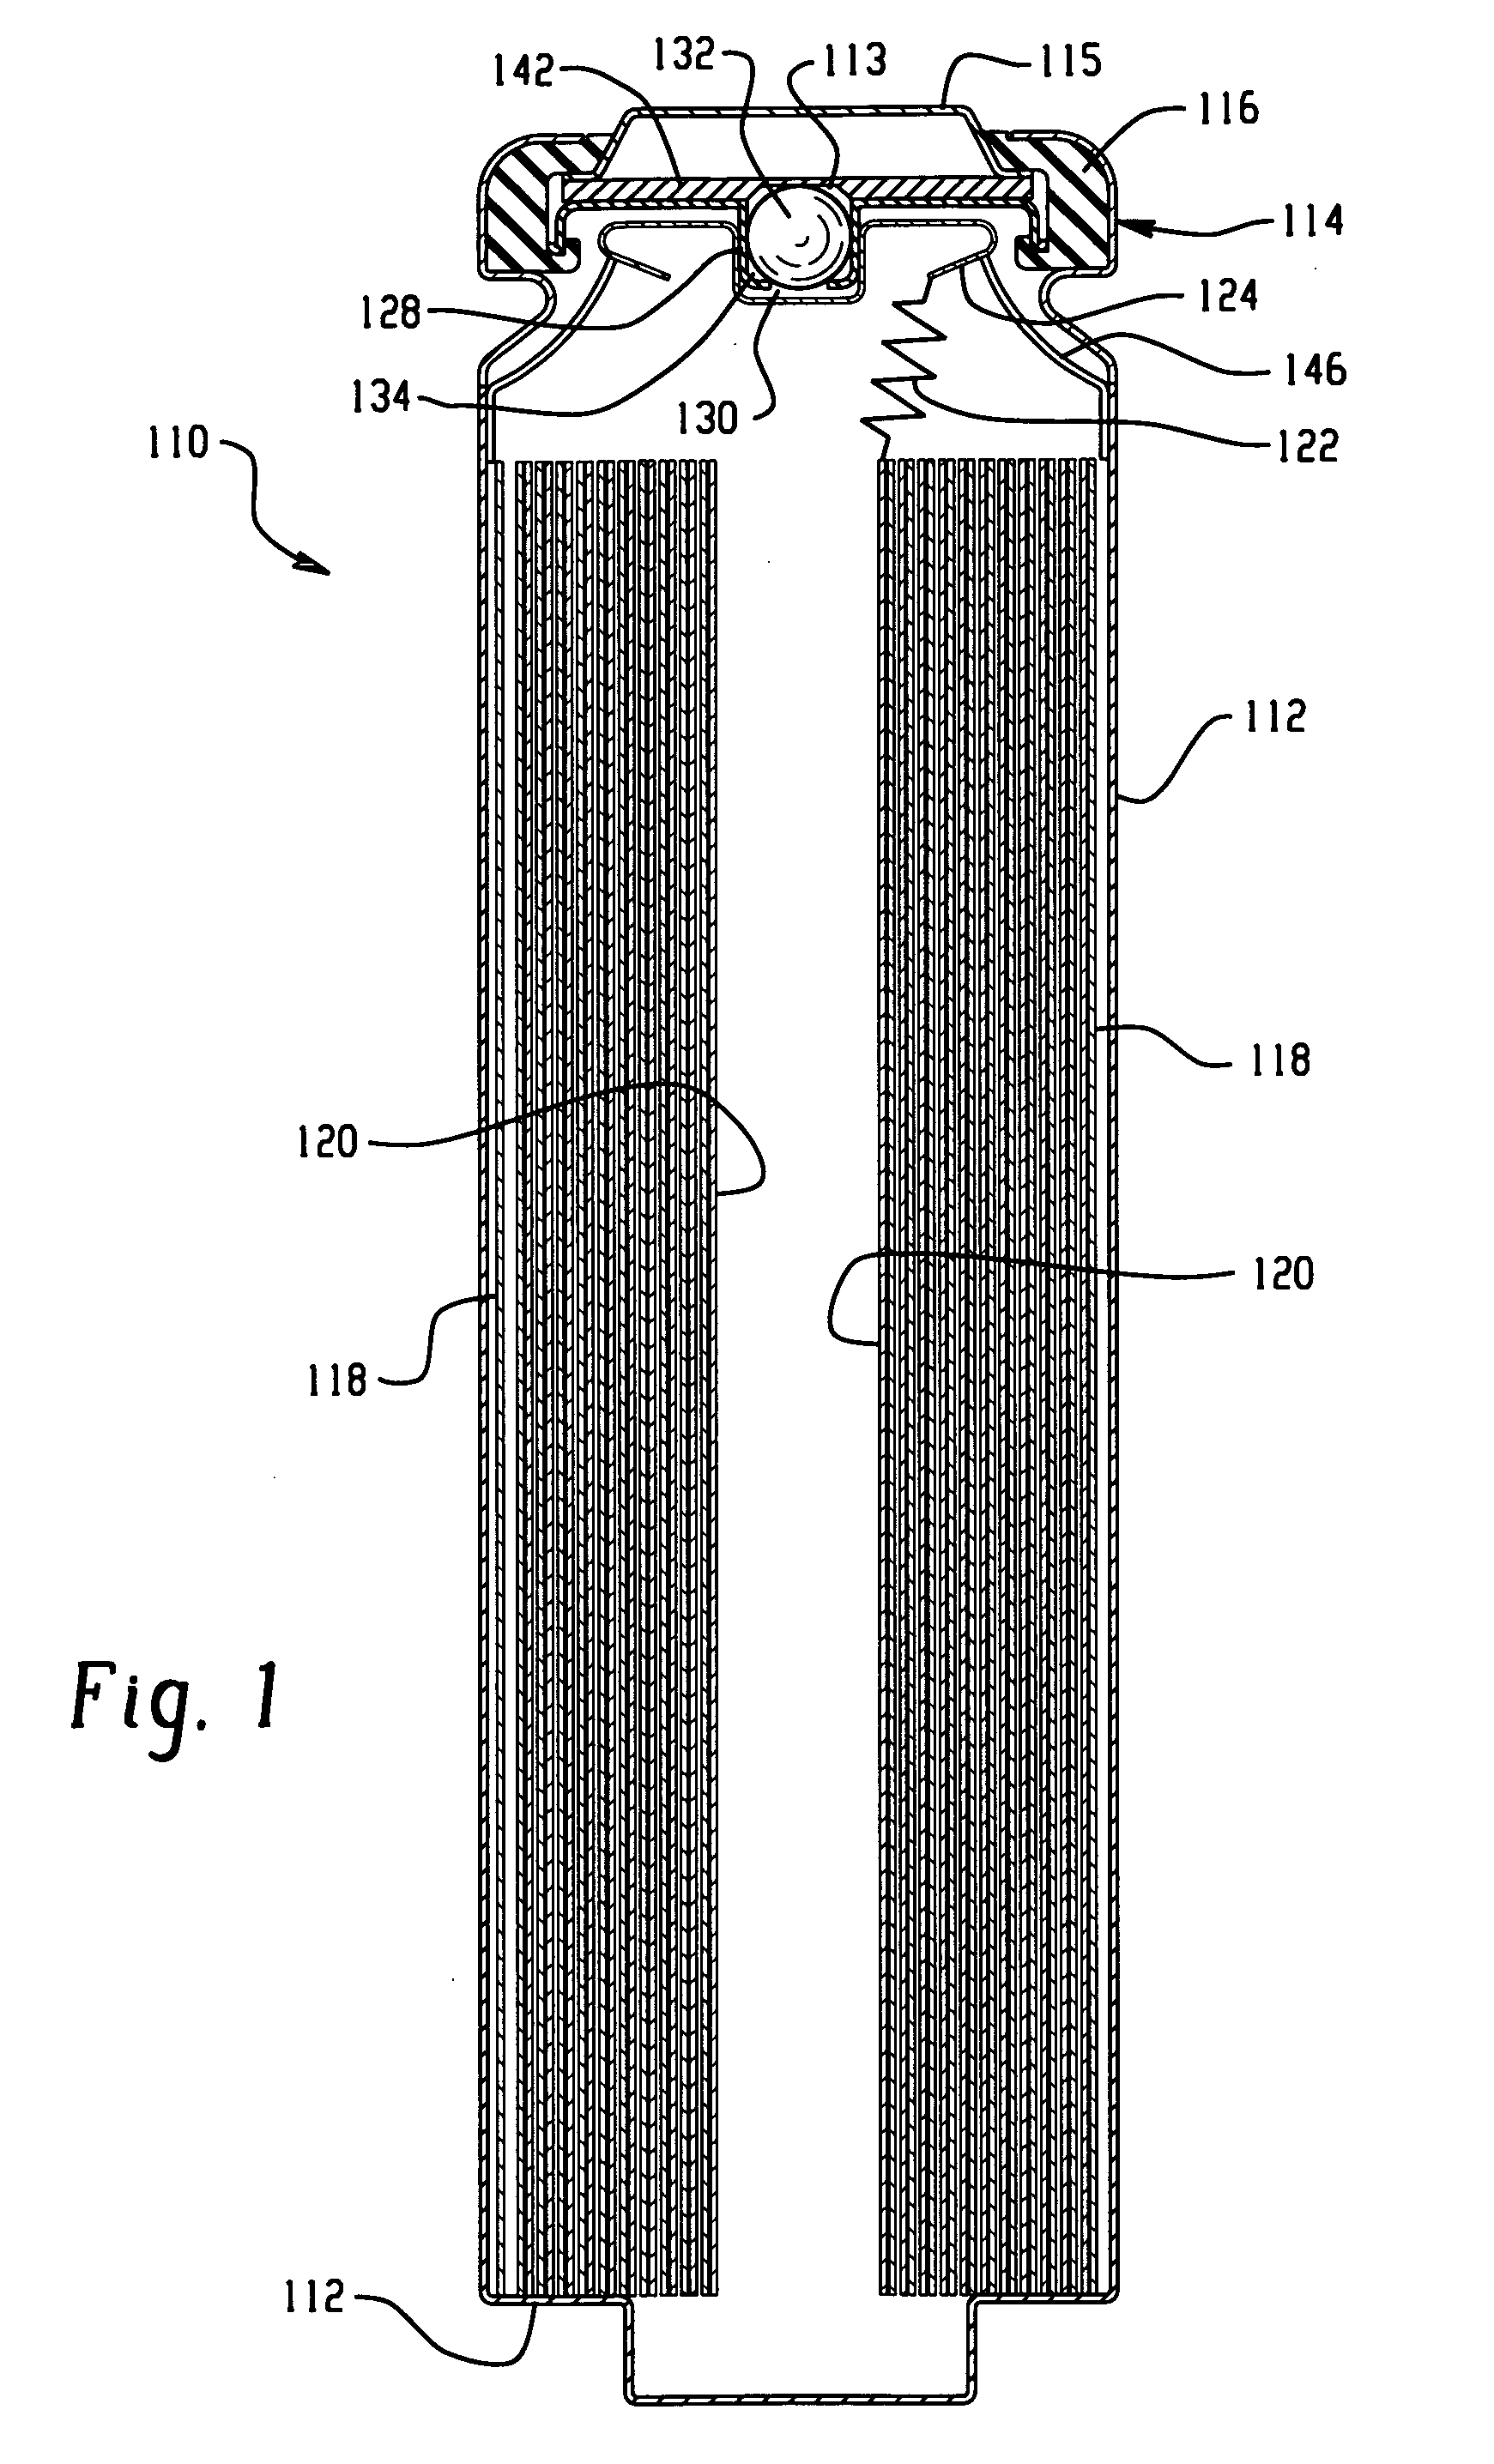 Electrochemical cell with positive container